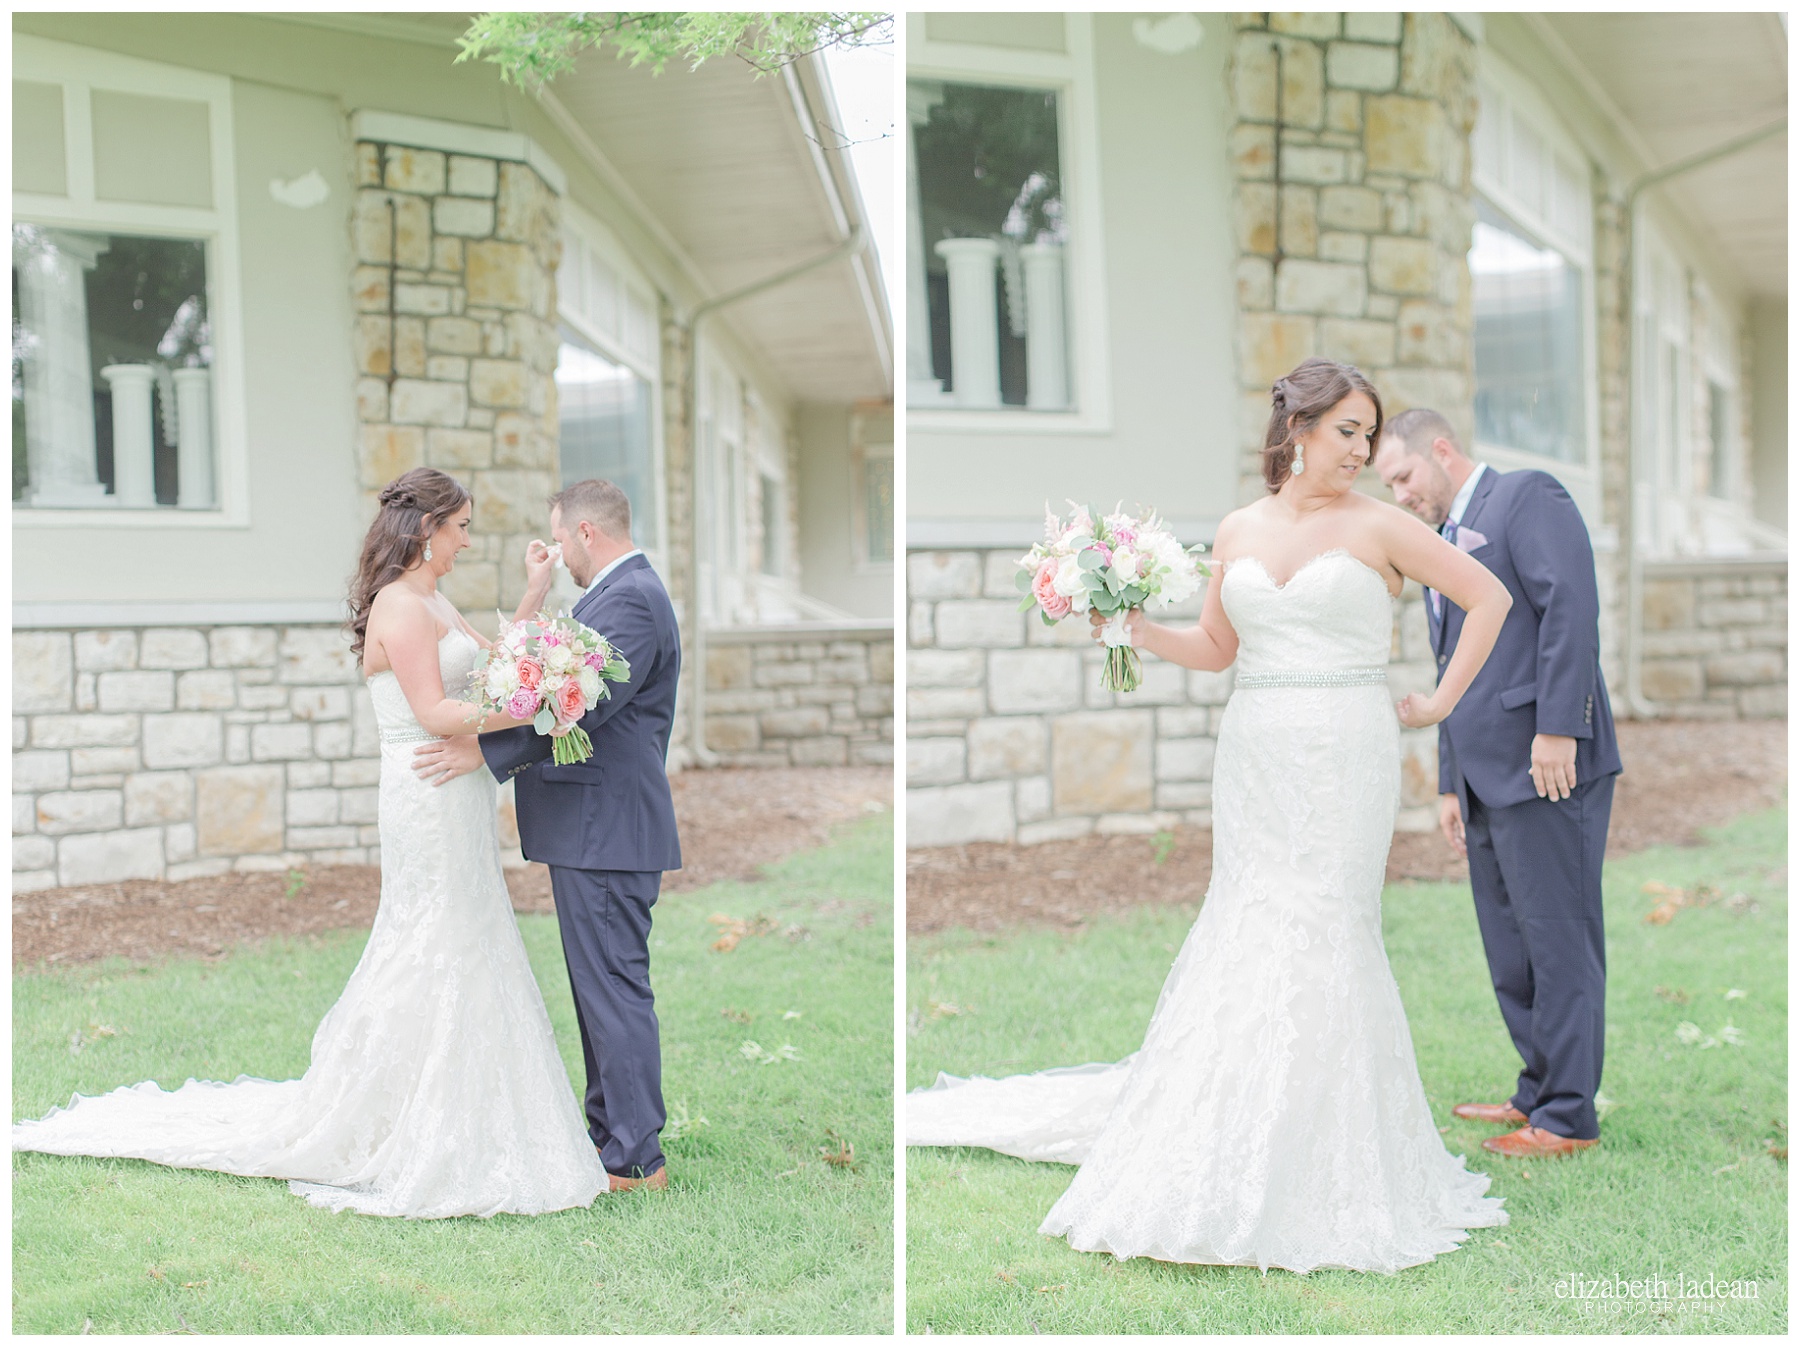 First Look wedding photography at Hillcrest Country Club